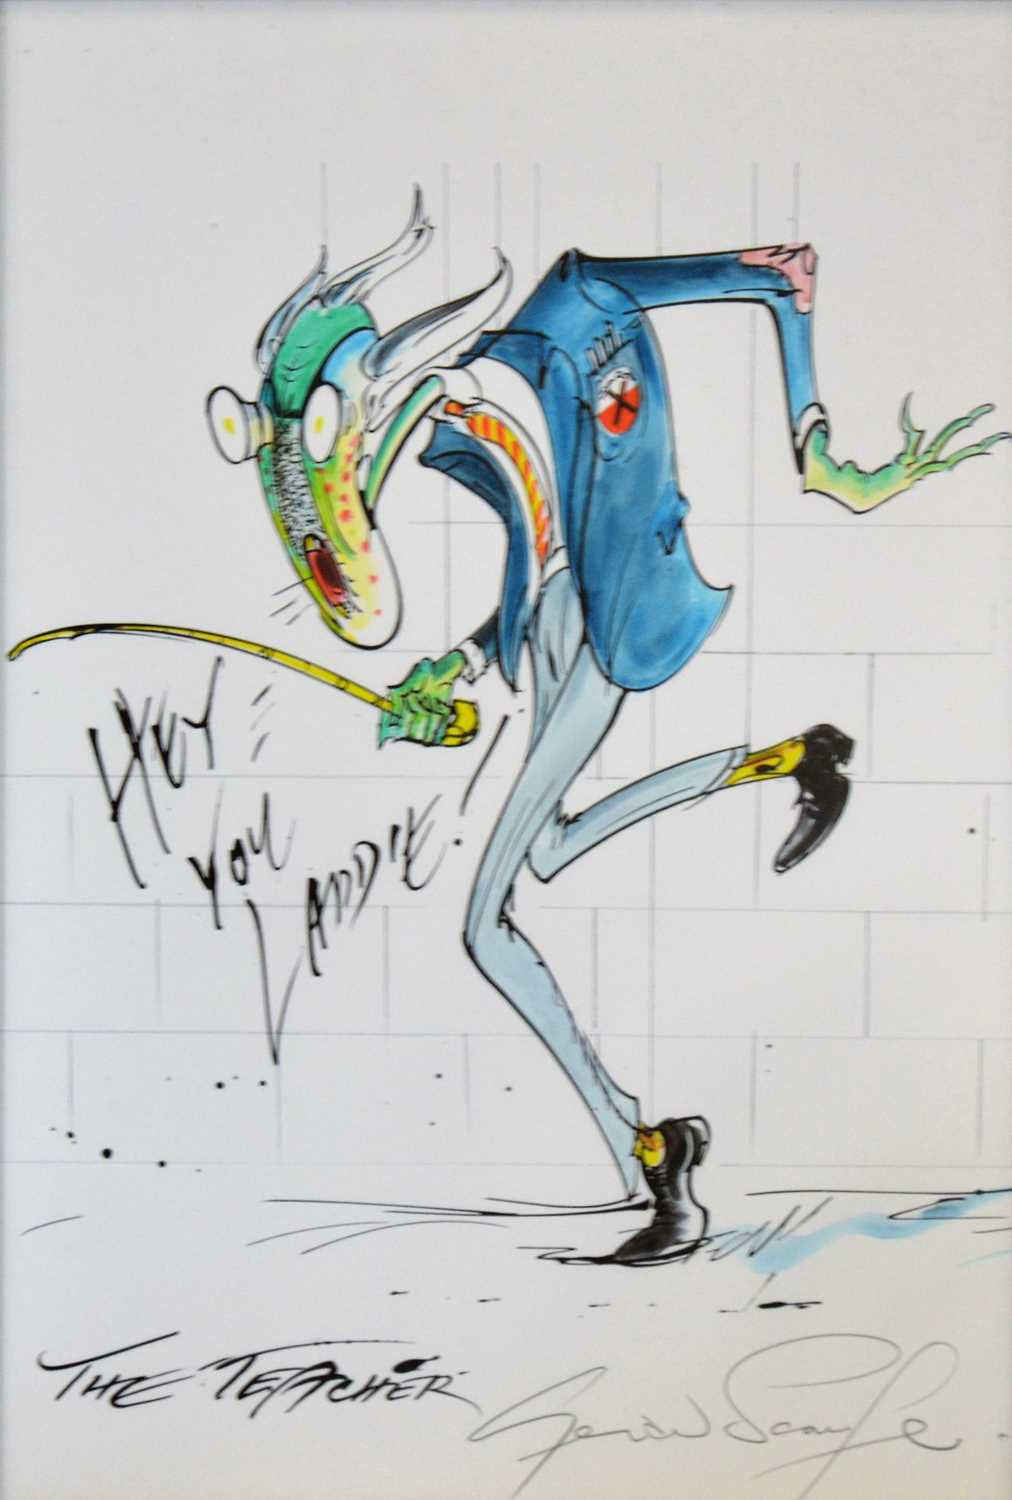 GERALD SCARFE Pink Floyd The Wall CZE Karte/card 10x15 cm Yes Minister